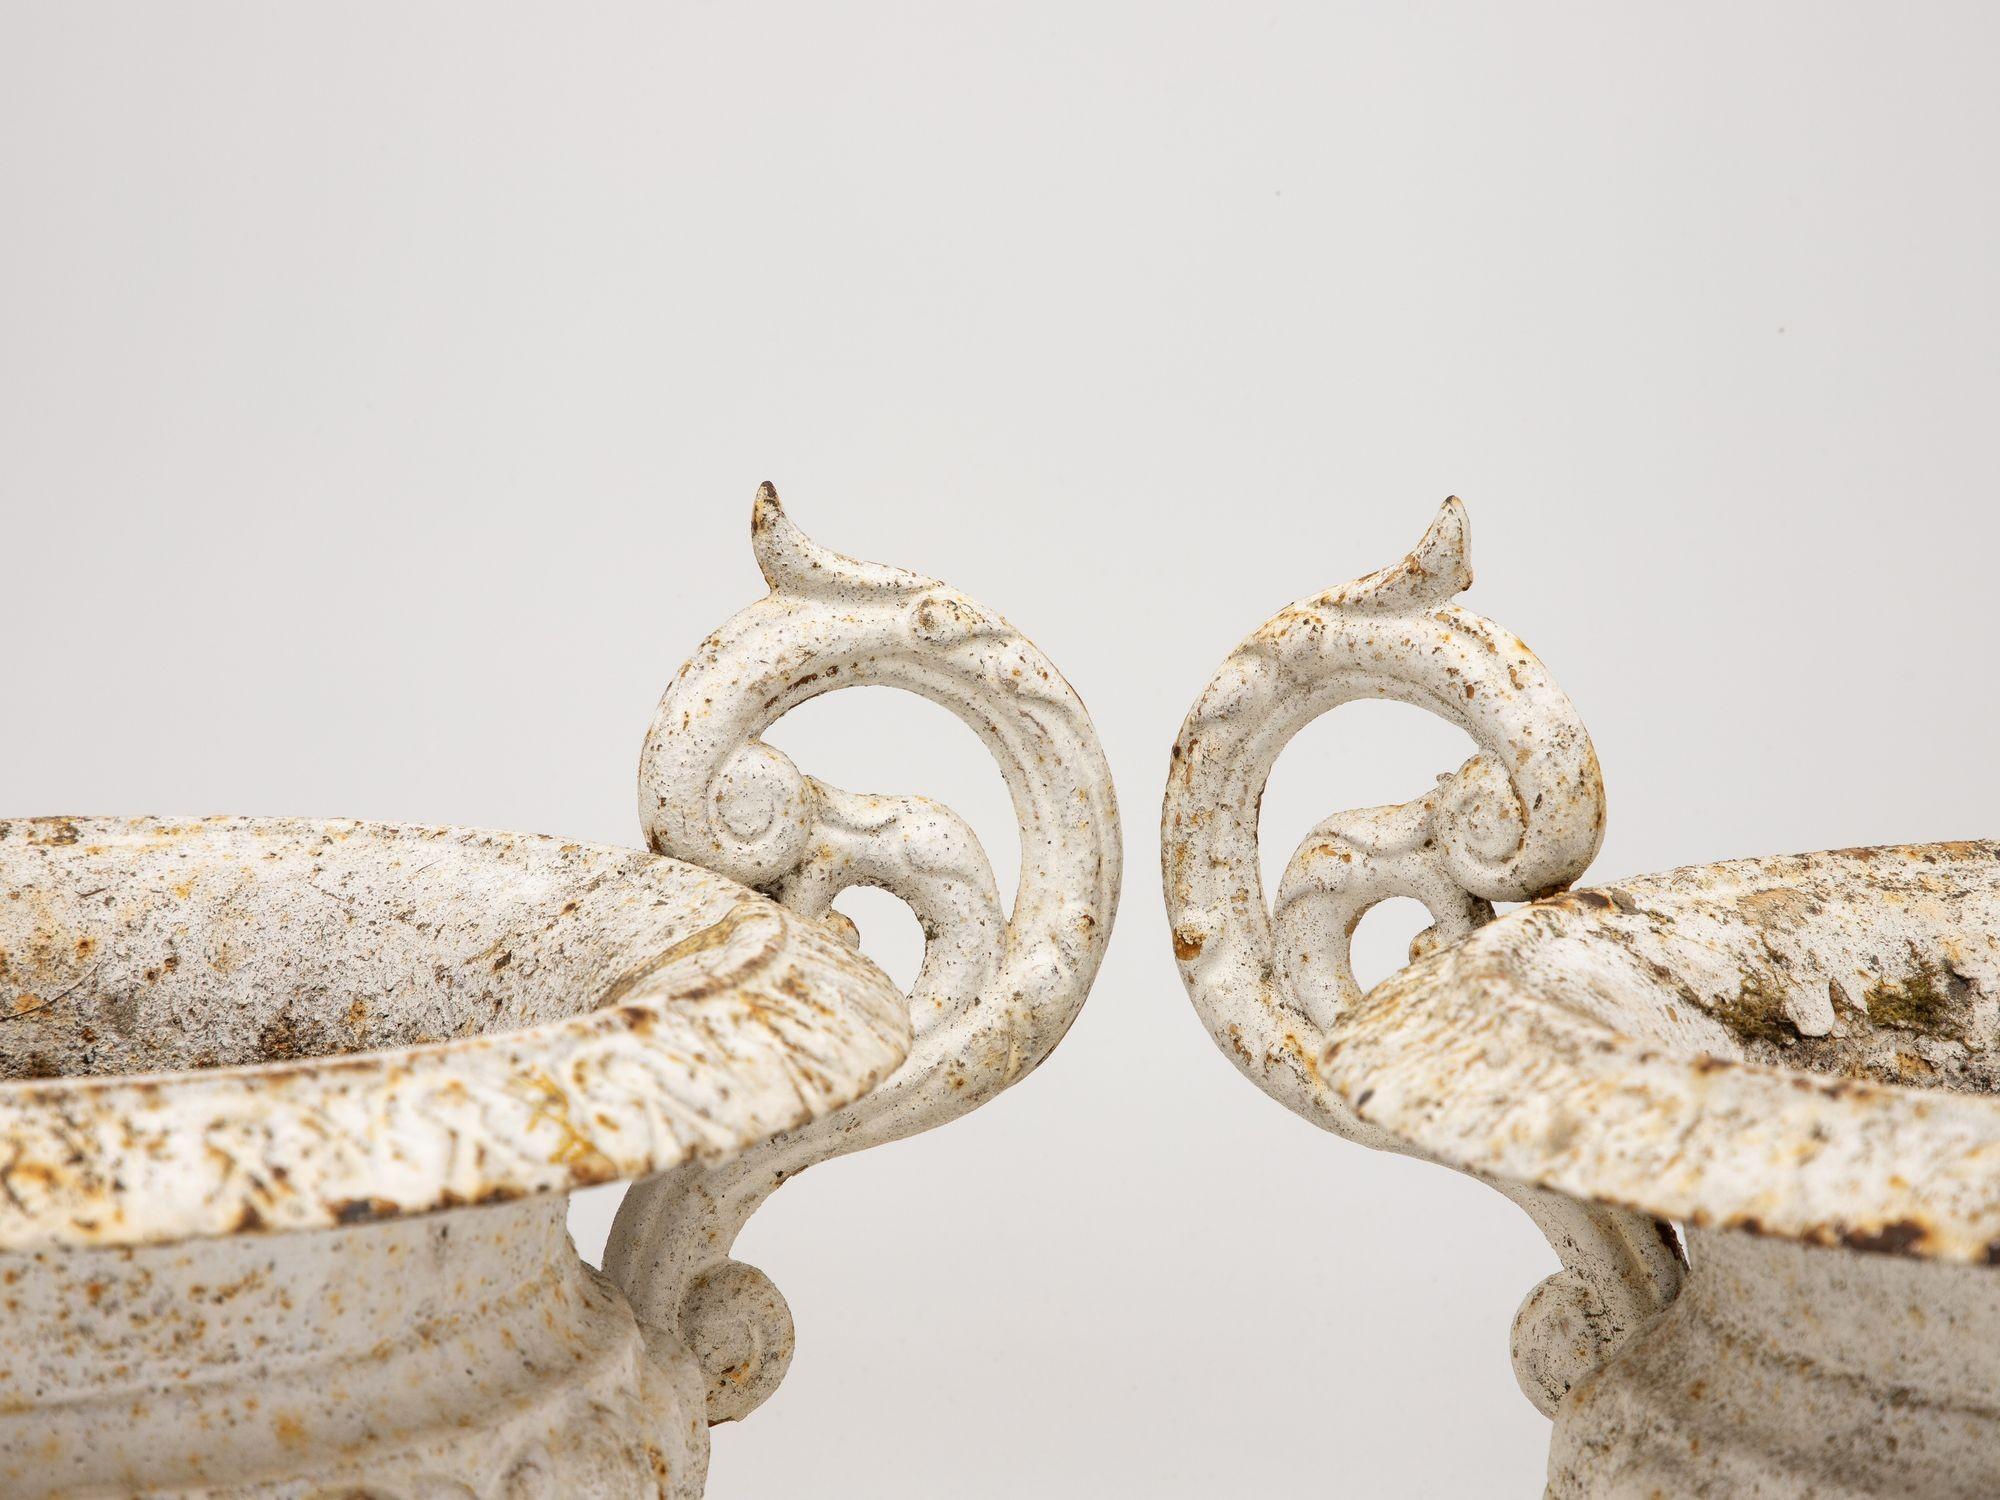 Pair of White Cast Iron Urns, French late 19th Century For Sale 2